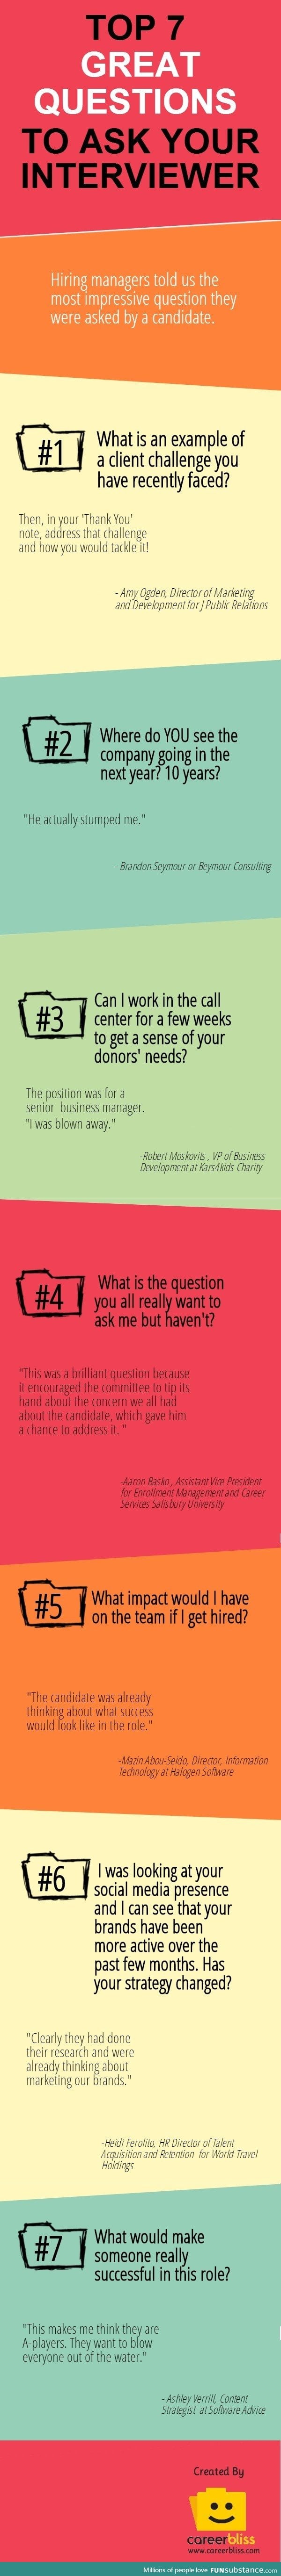 Great questions to ask your interviewer